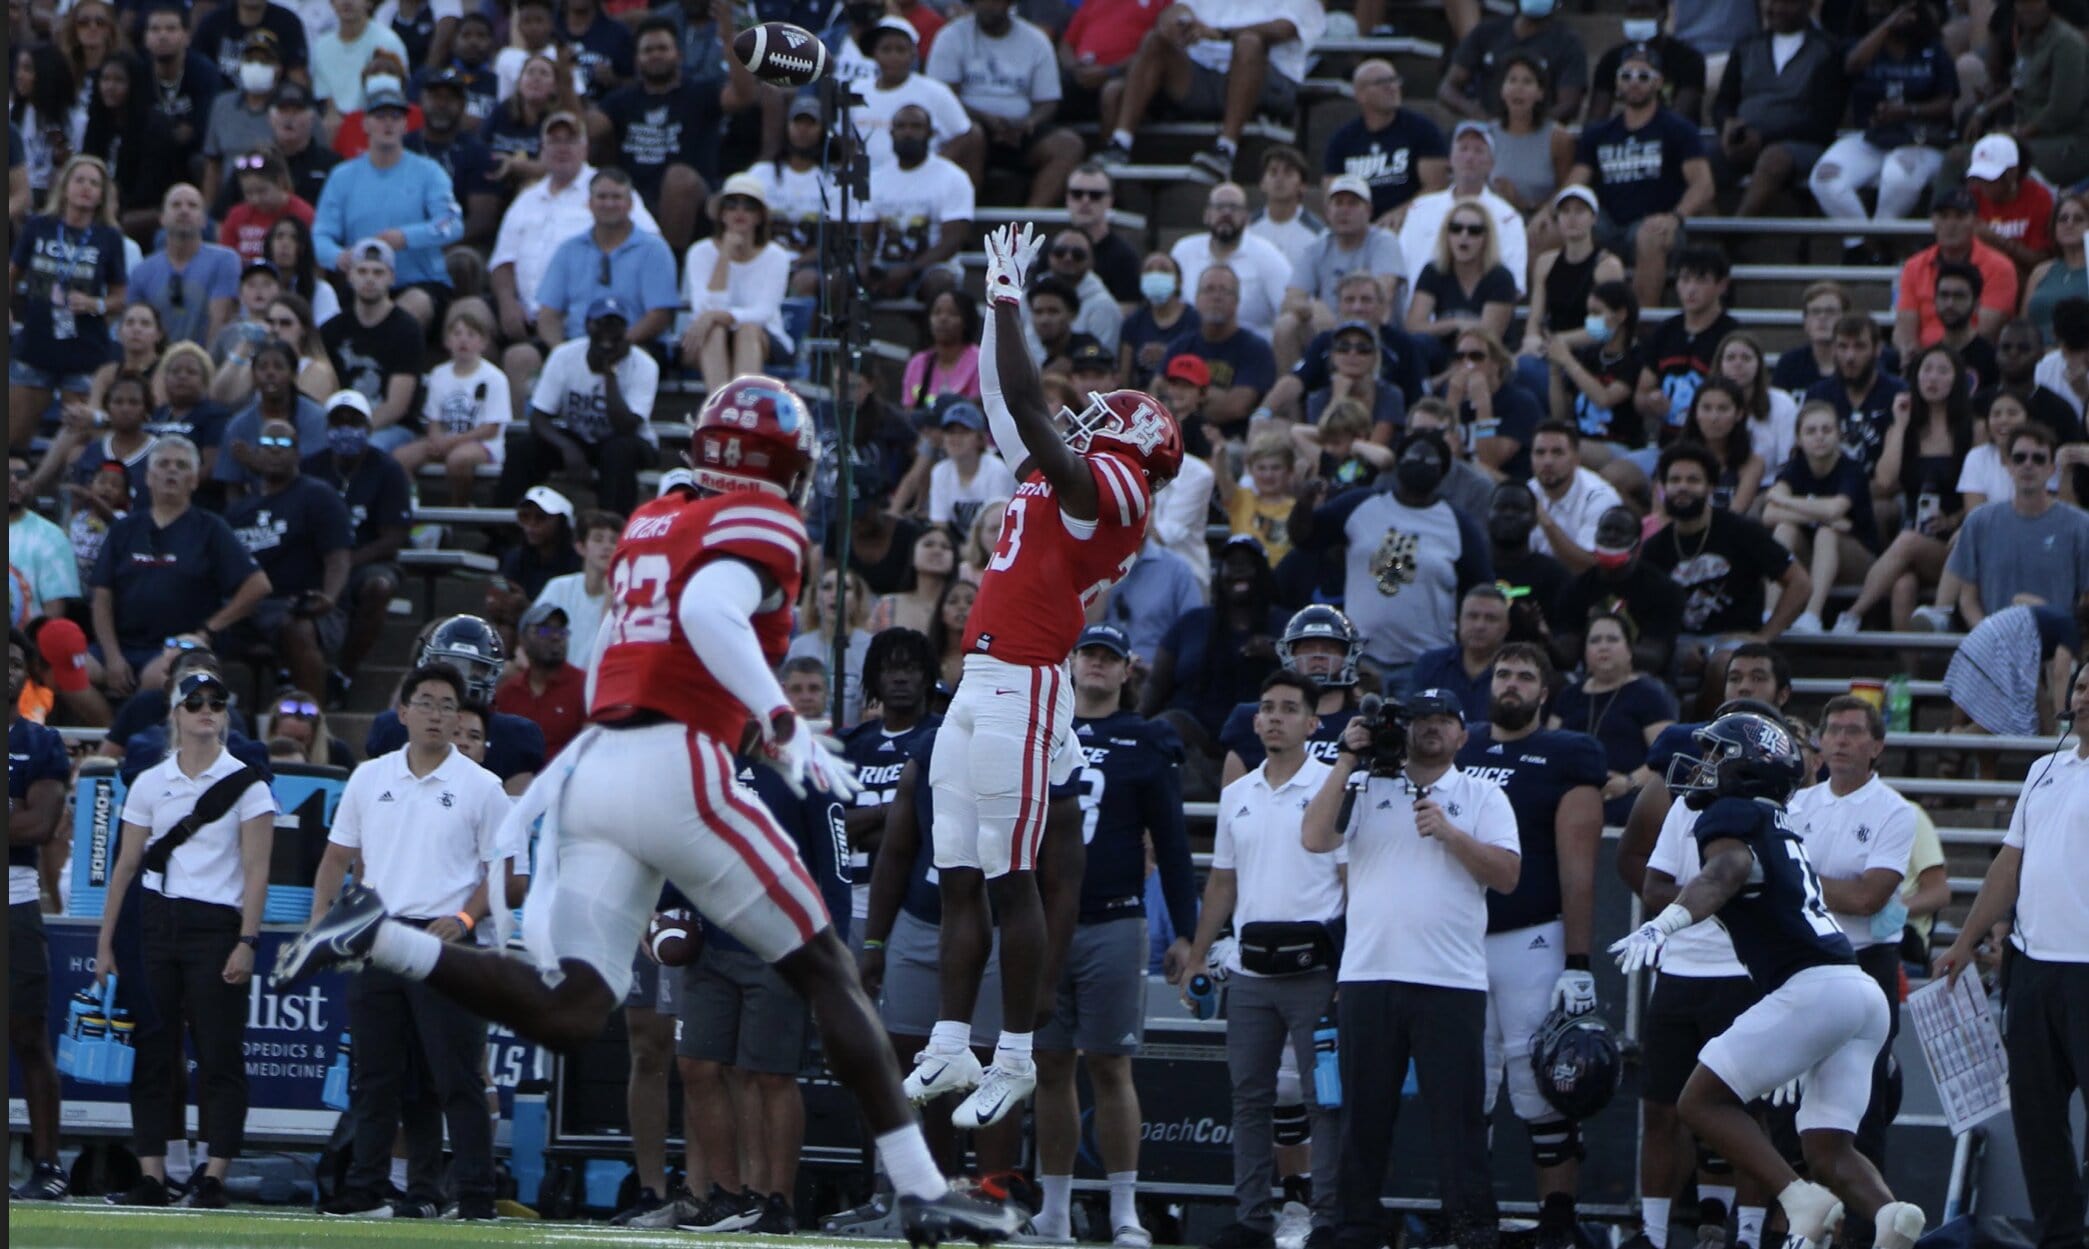 Junior cornerback Art Green rises up for an interception in UH football's victory over Rice on Sept. 11. | Sean Thomas/The Cougar